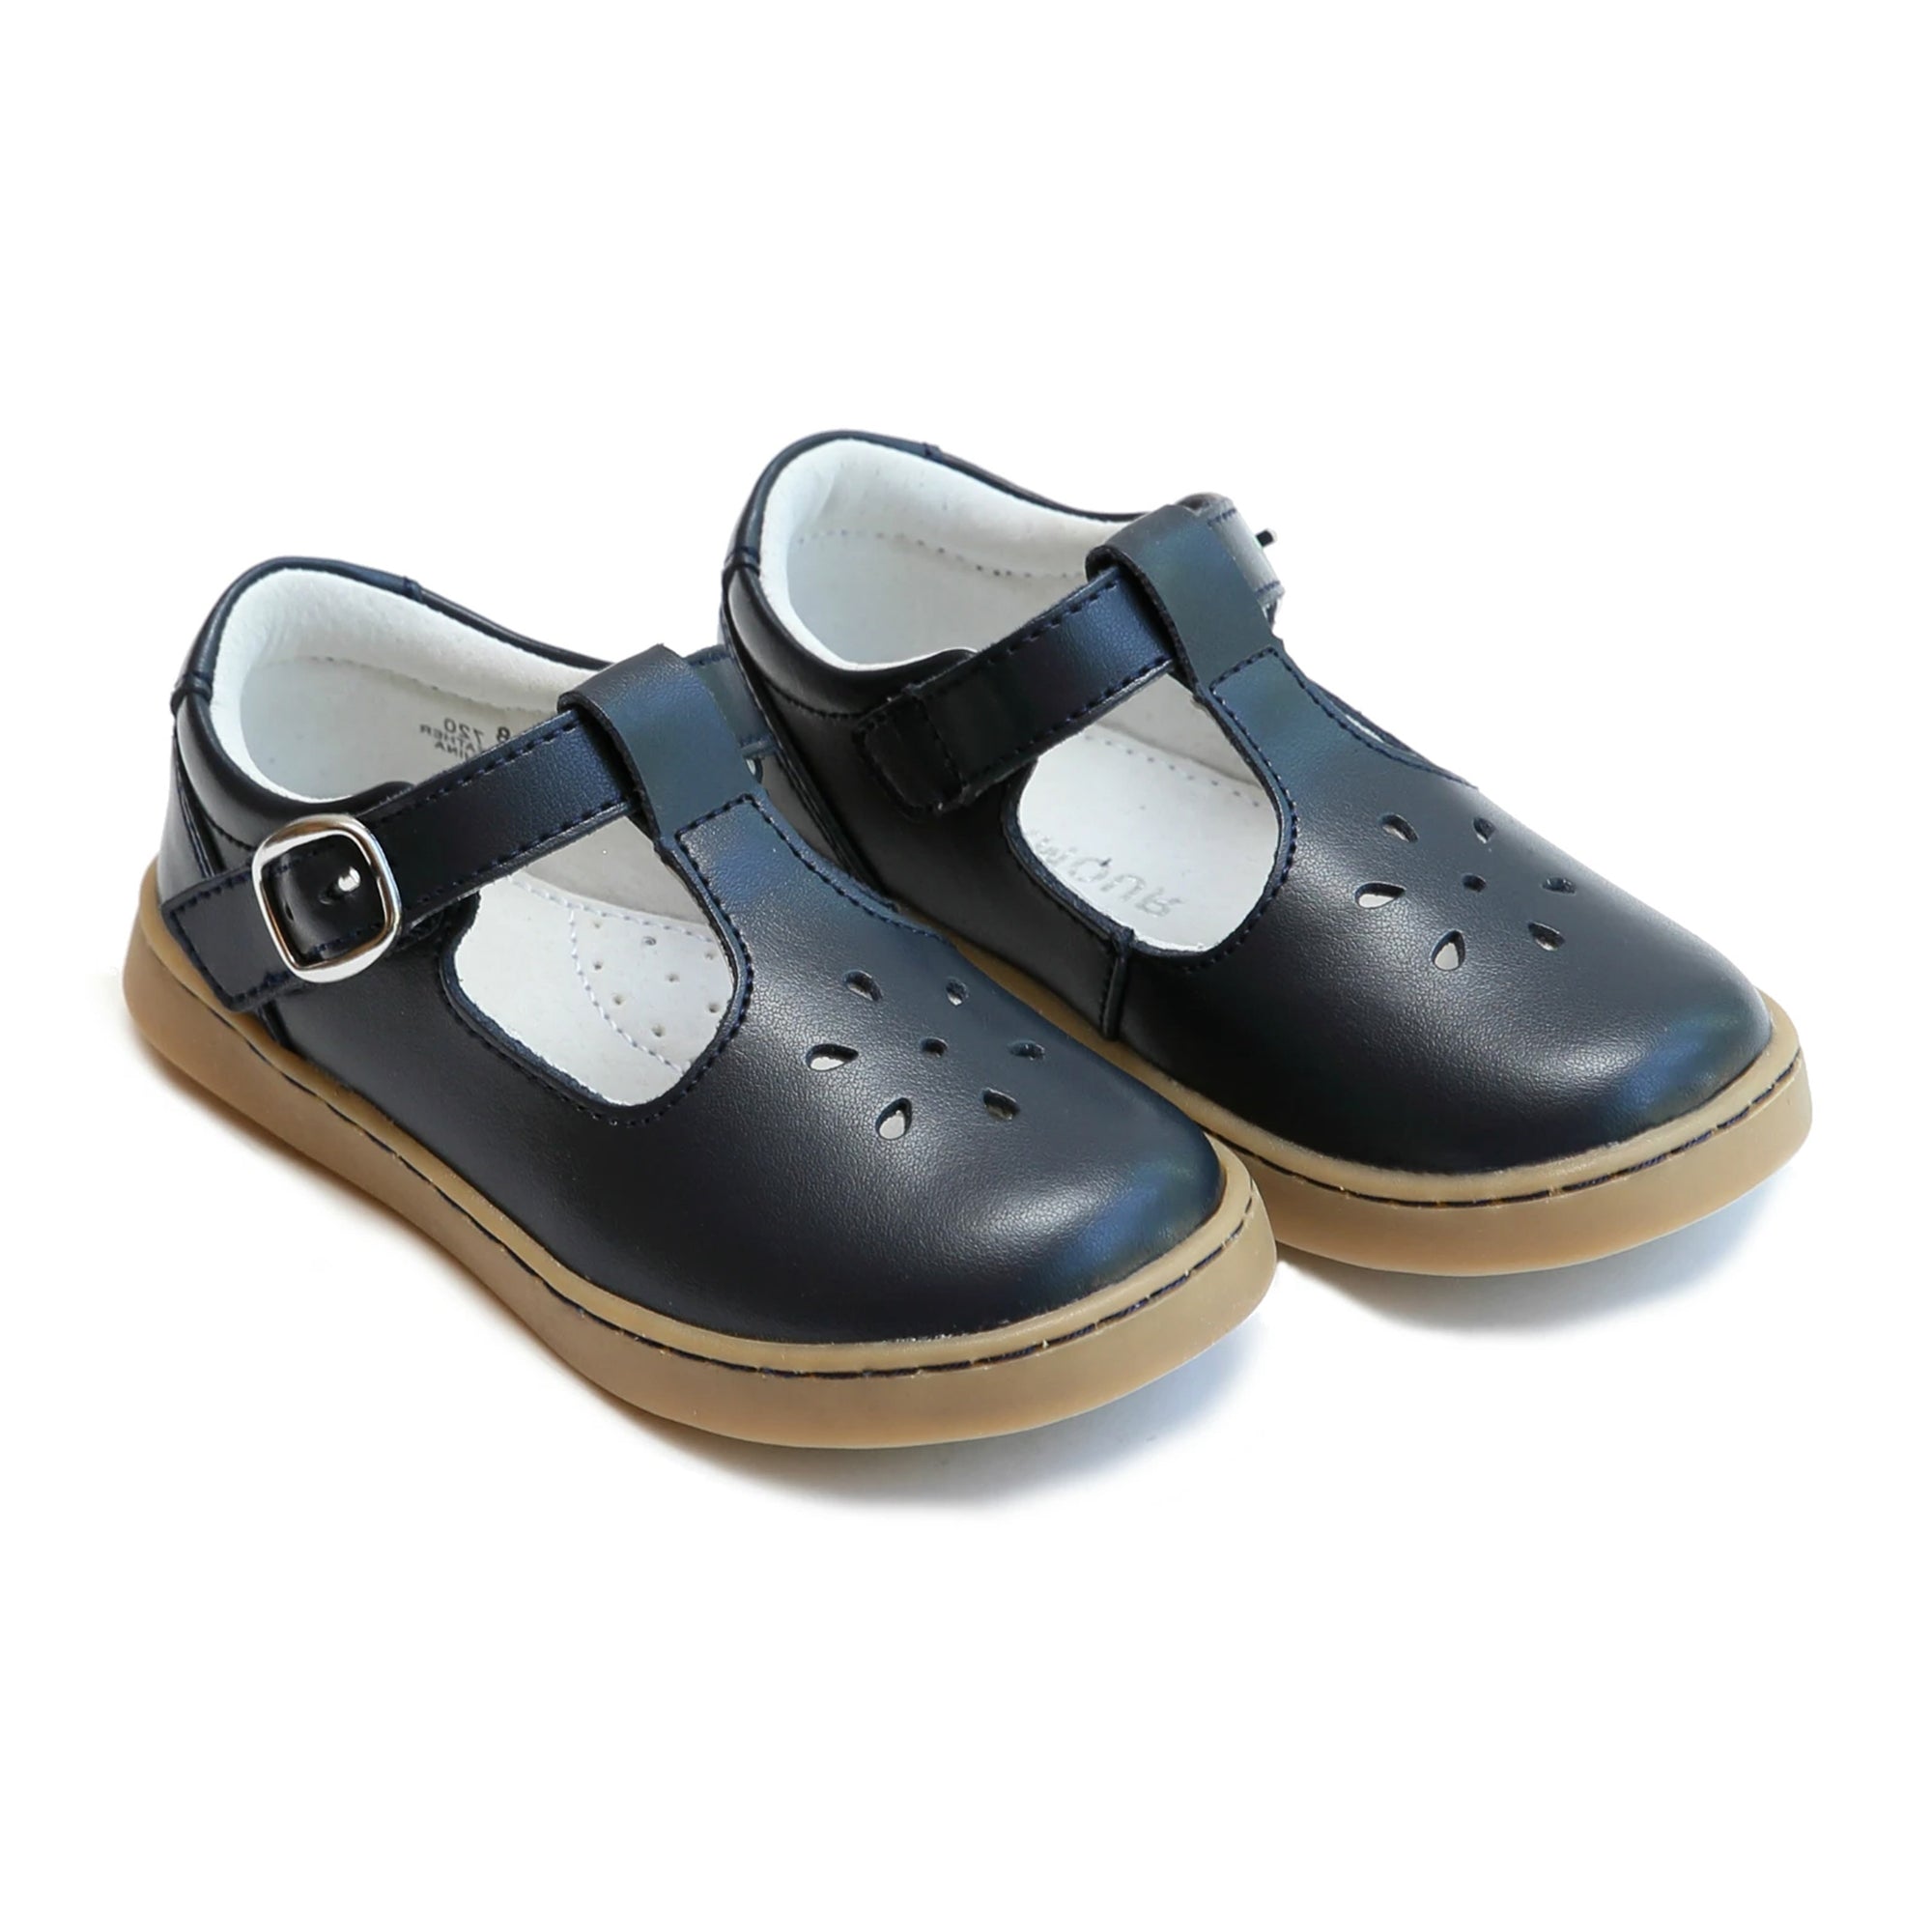 L'Amour Chelsea Little Girl's Navy Blue T-Strap Mary Jane Shoes